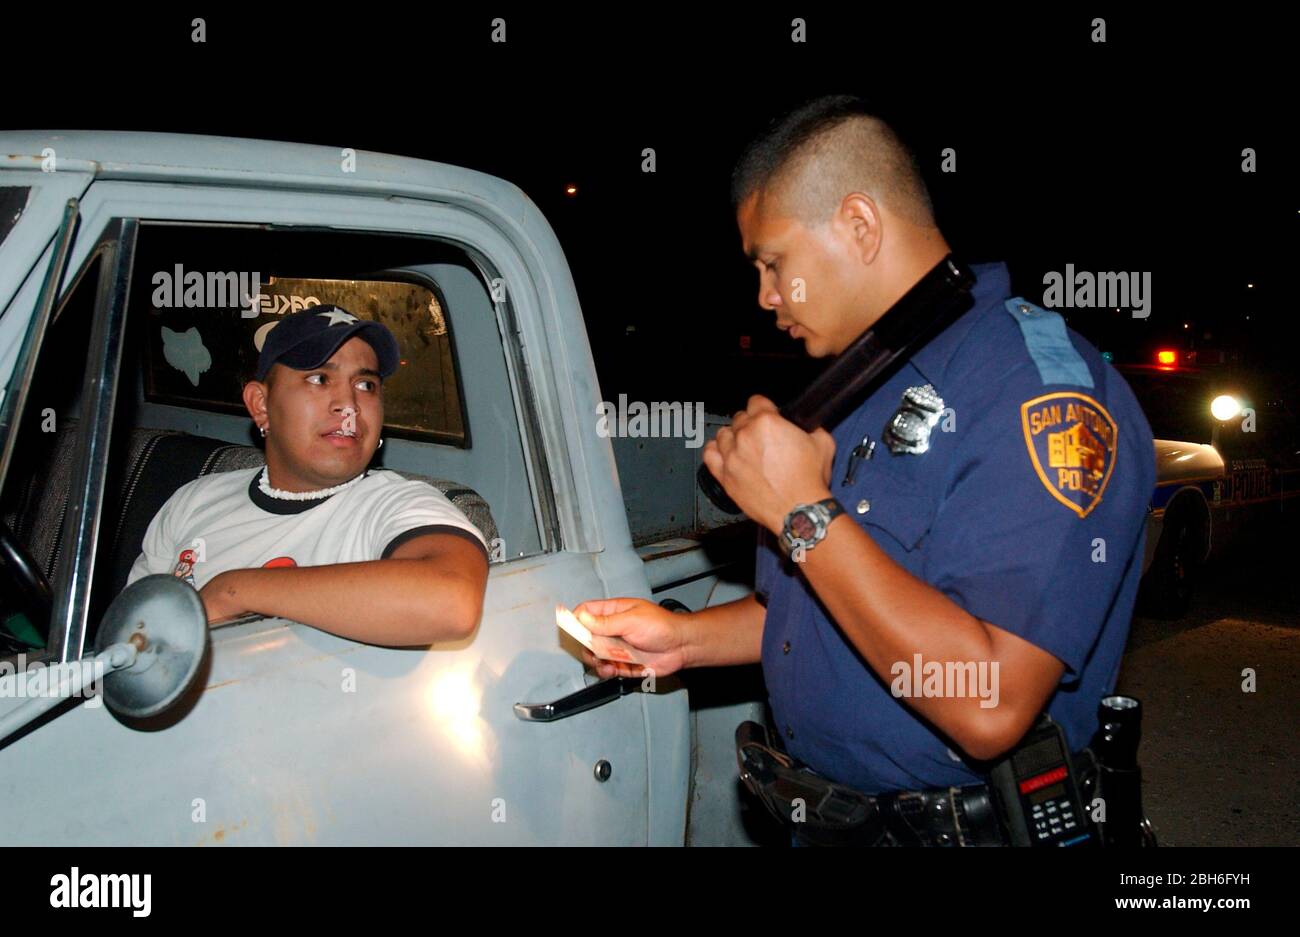 San Antonio, Texas USA, August 2003. Hispanic male police officer questions a driver who had an expired driver's license during an overnight shift.  ©Bob Daemmrich Stock Photo